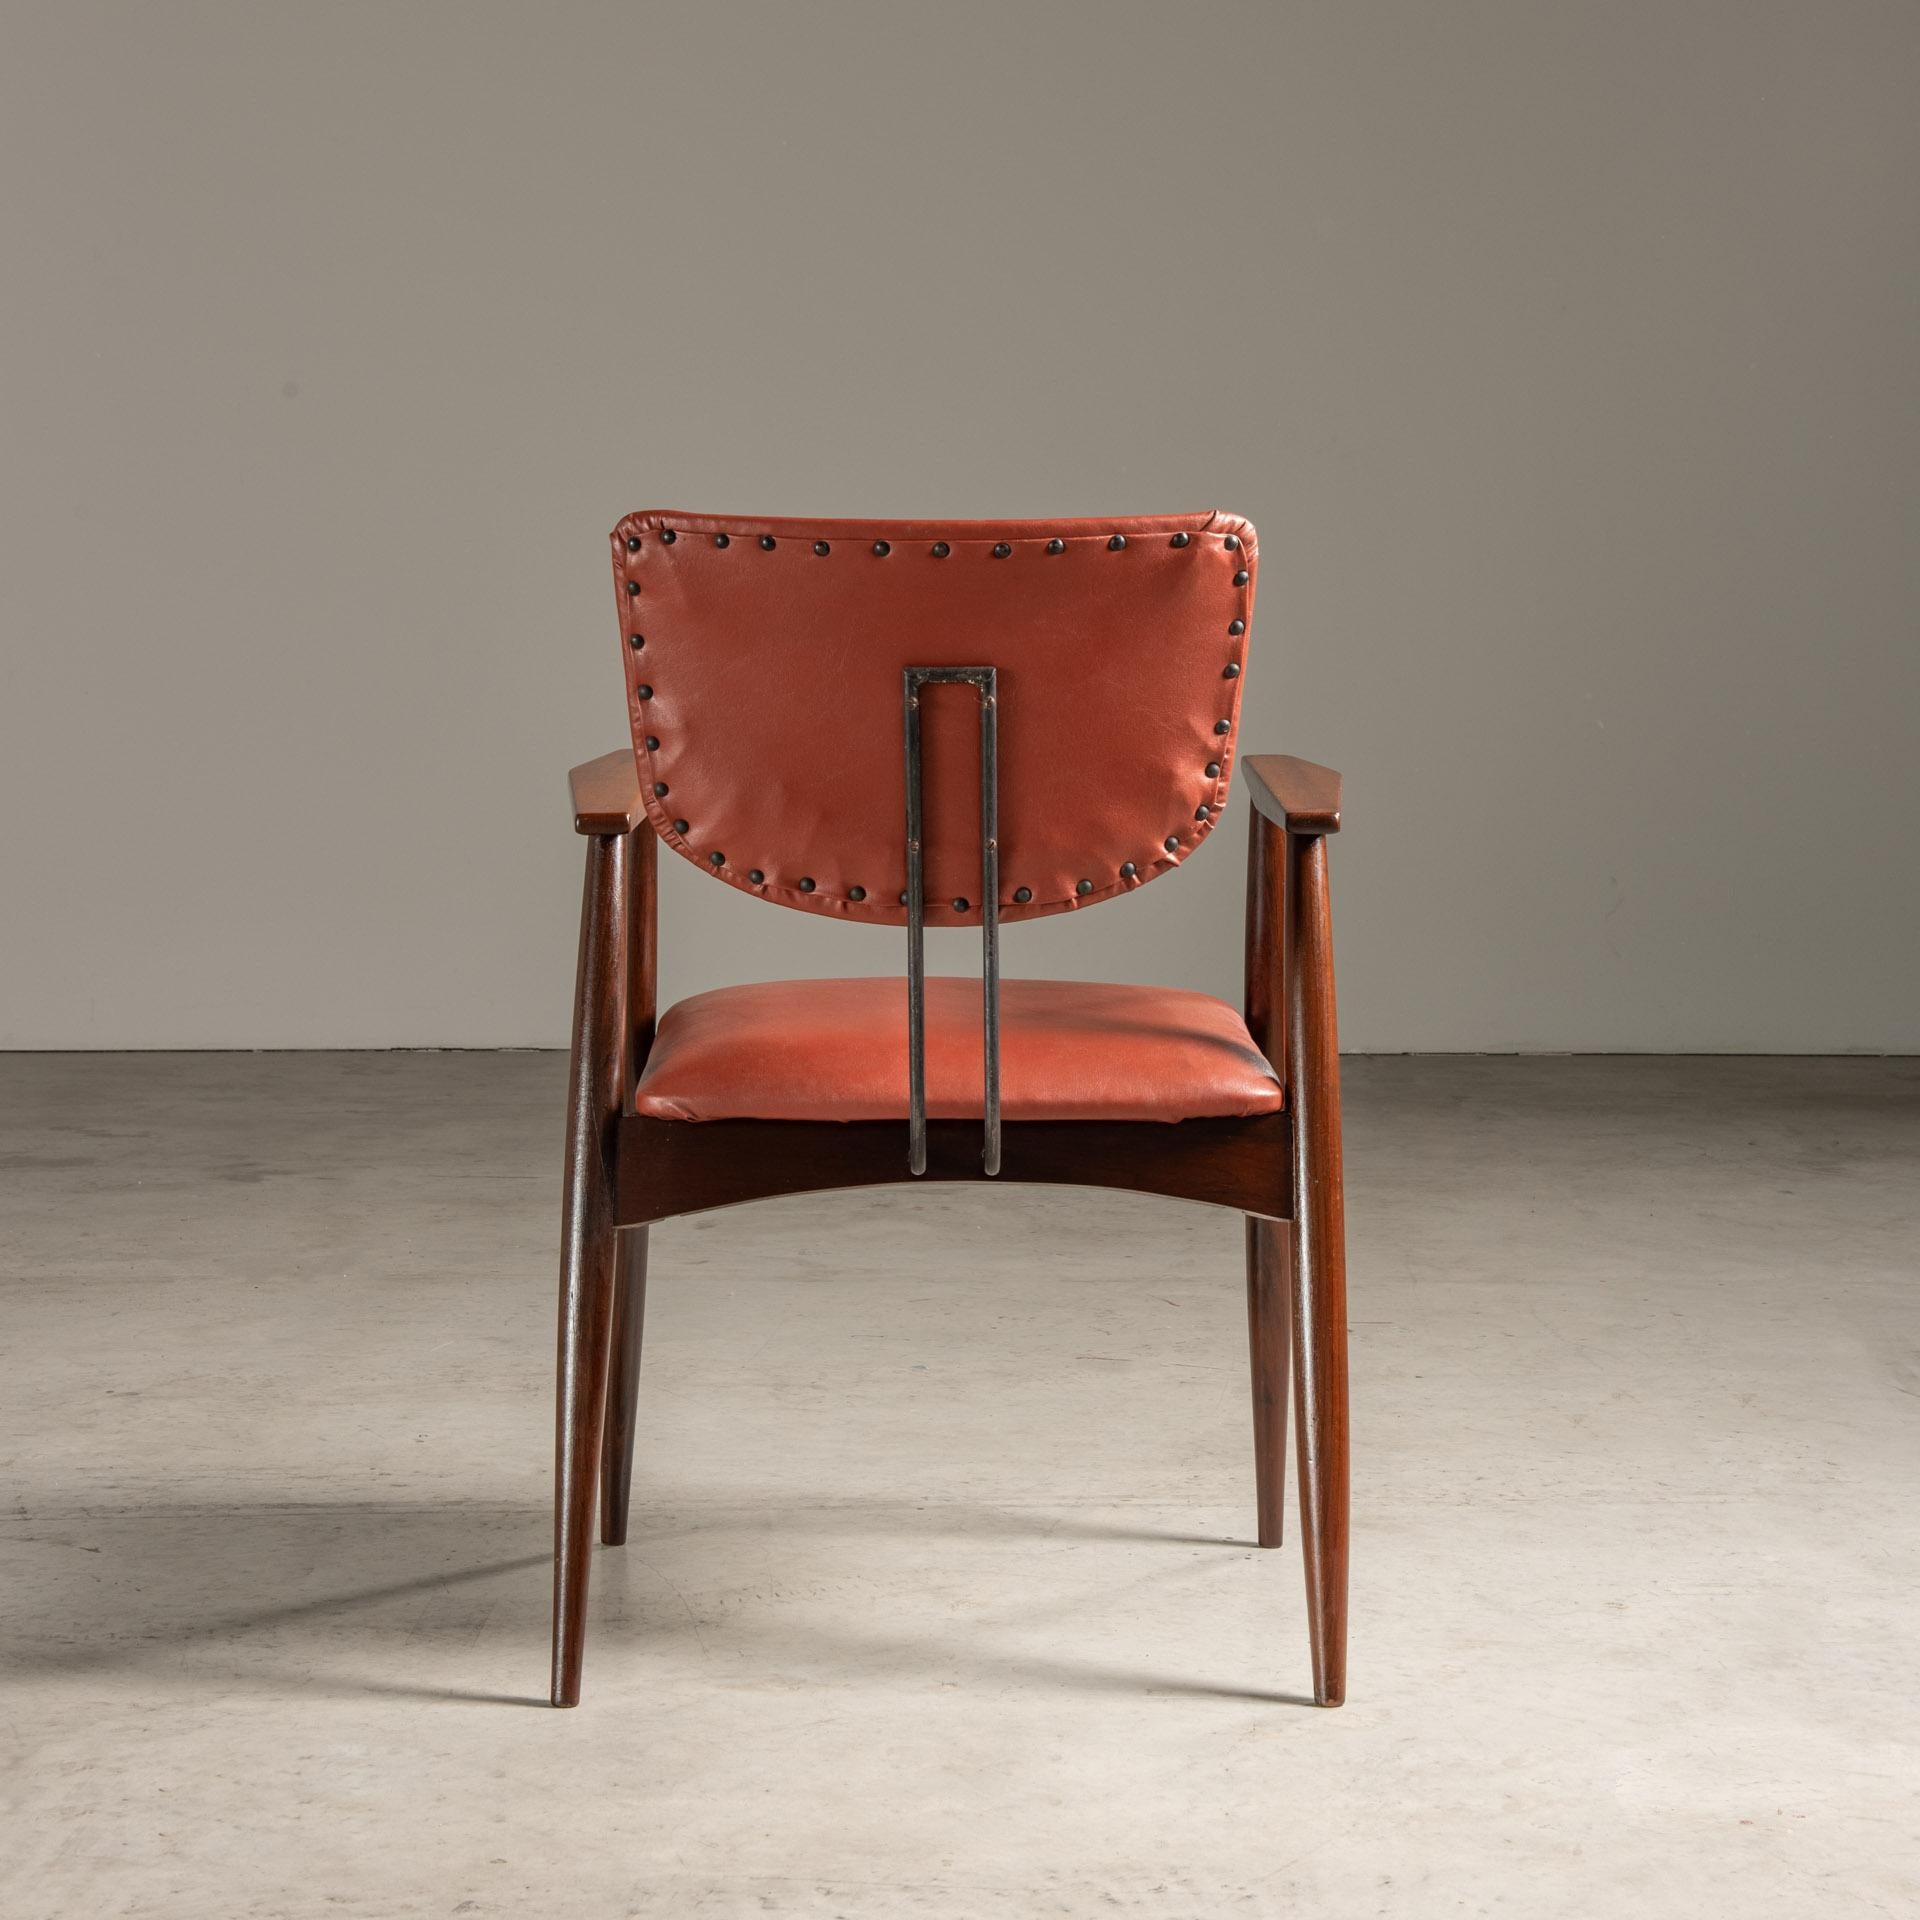 Chair in Wood, Iron and Leather, by Michel Arnoult, Brazilian Mid-Century Modern In Good Condition For Sale In Sao Paulo, SP